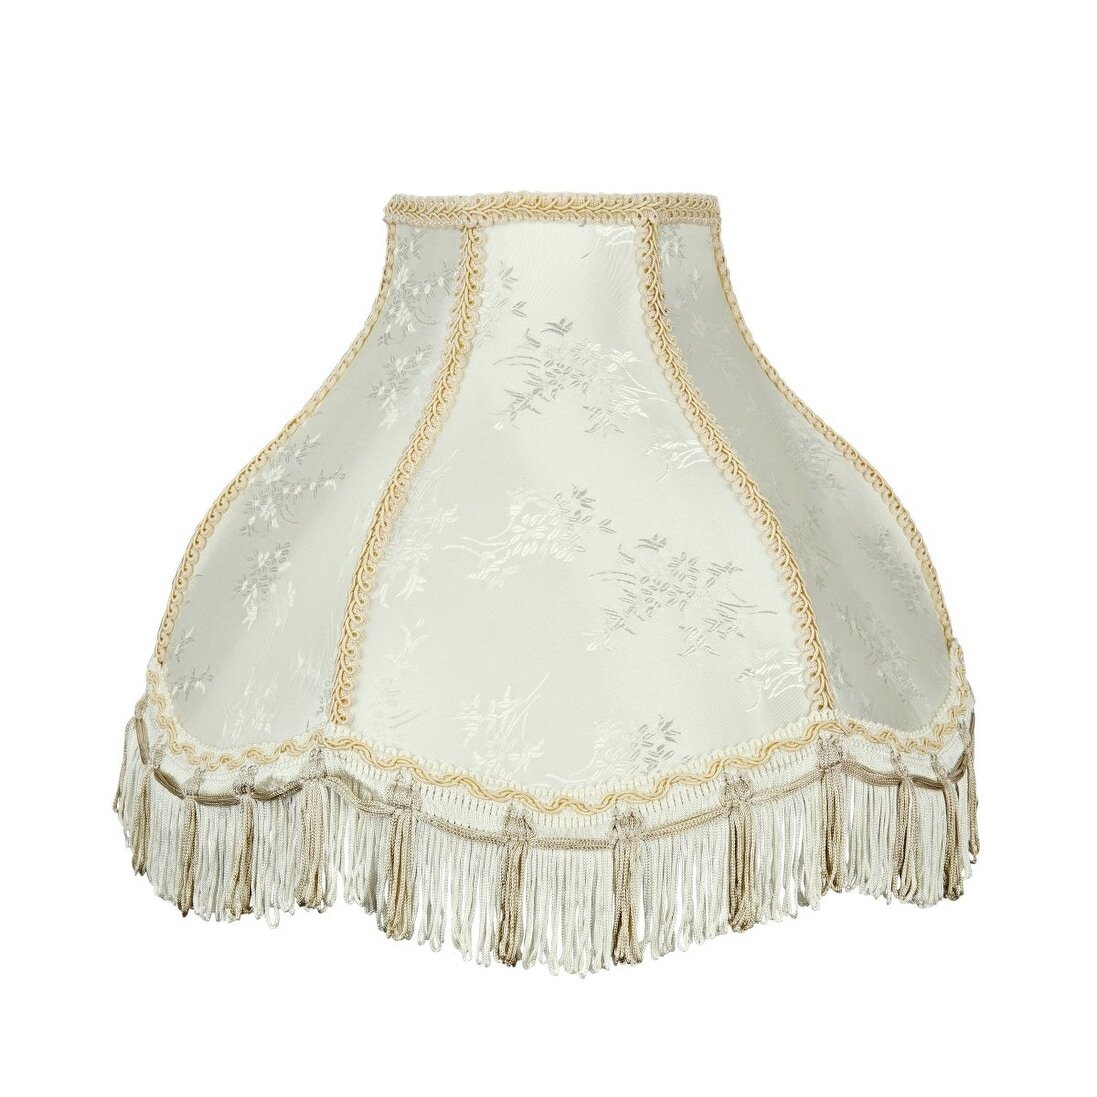 Scallop Bell Asian Lamp Shades with Fringe Design